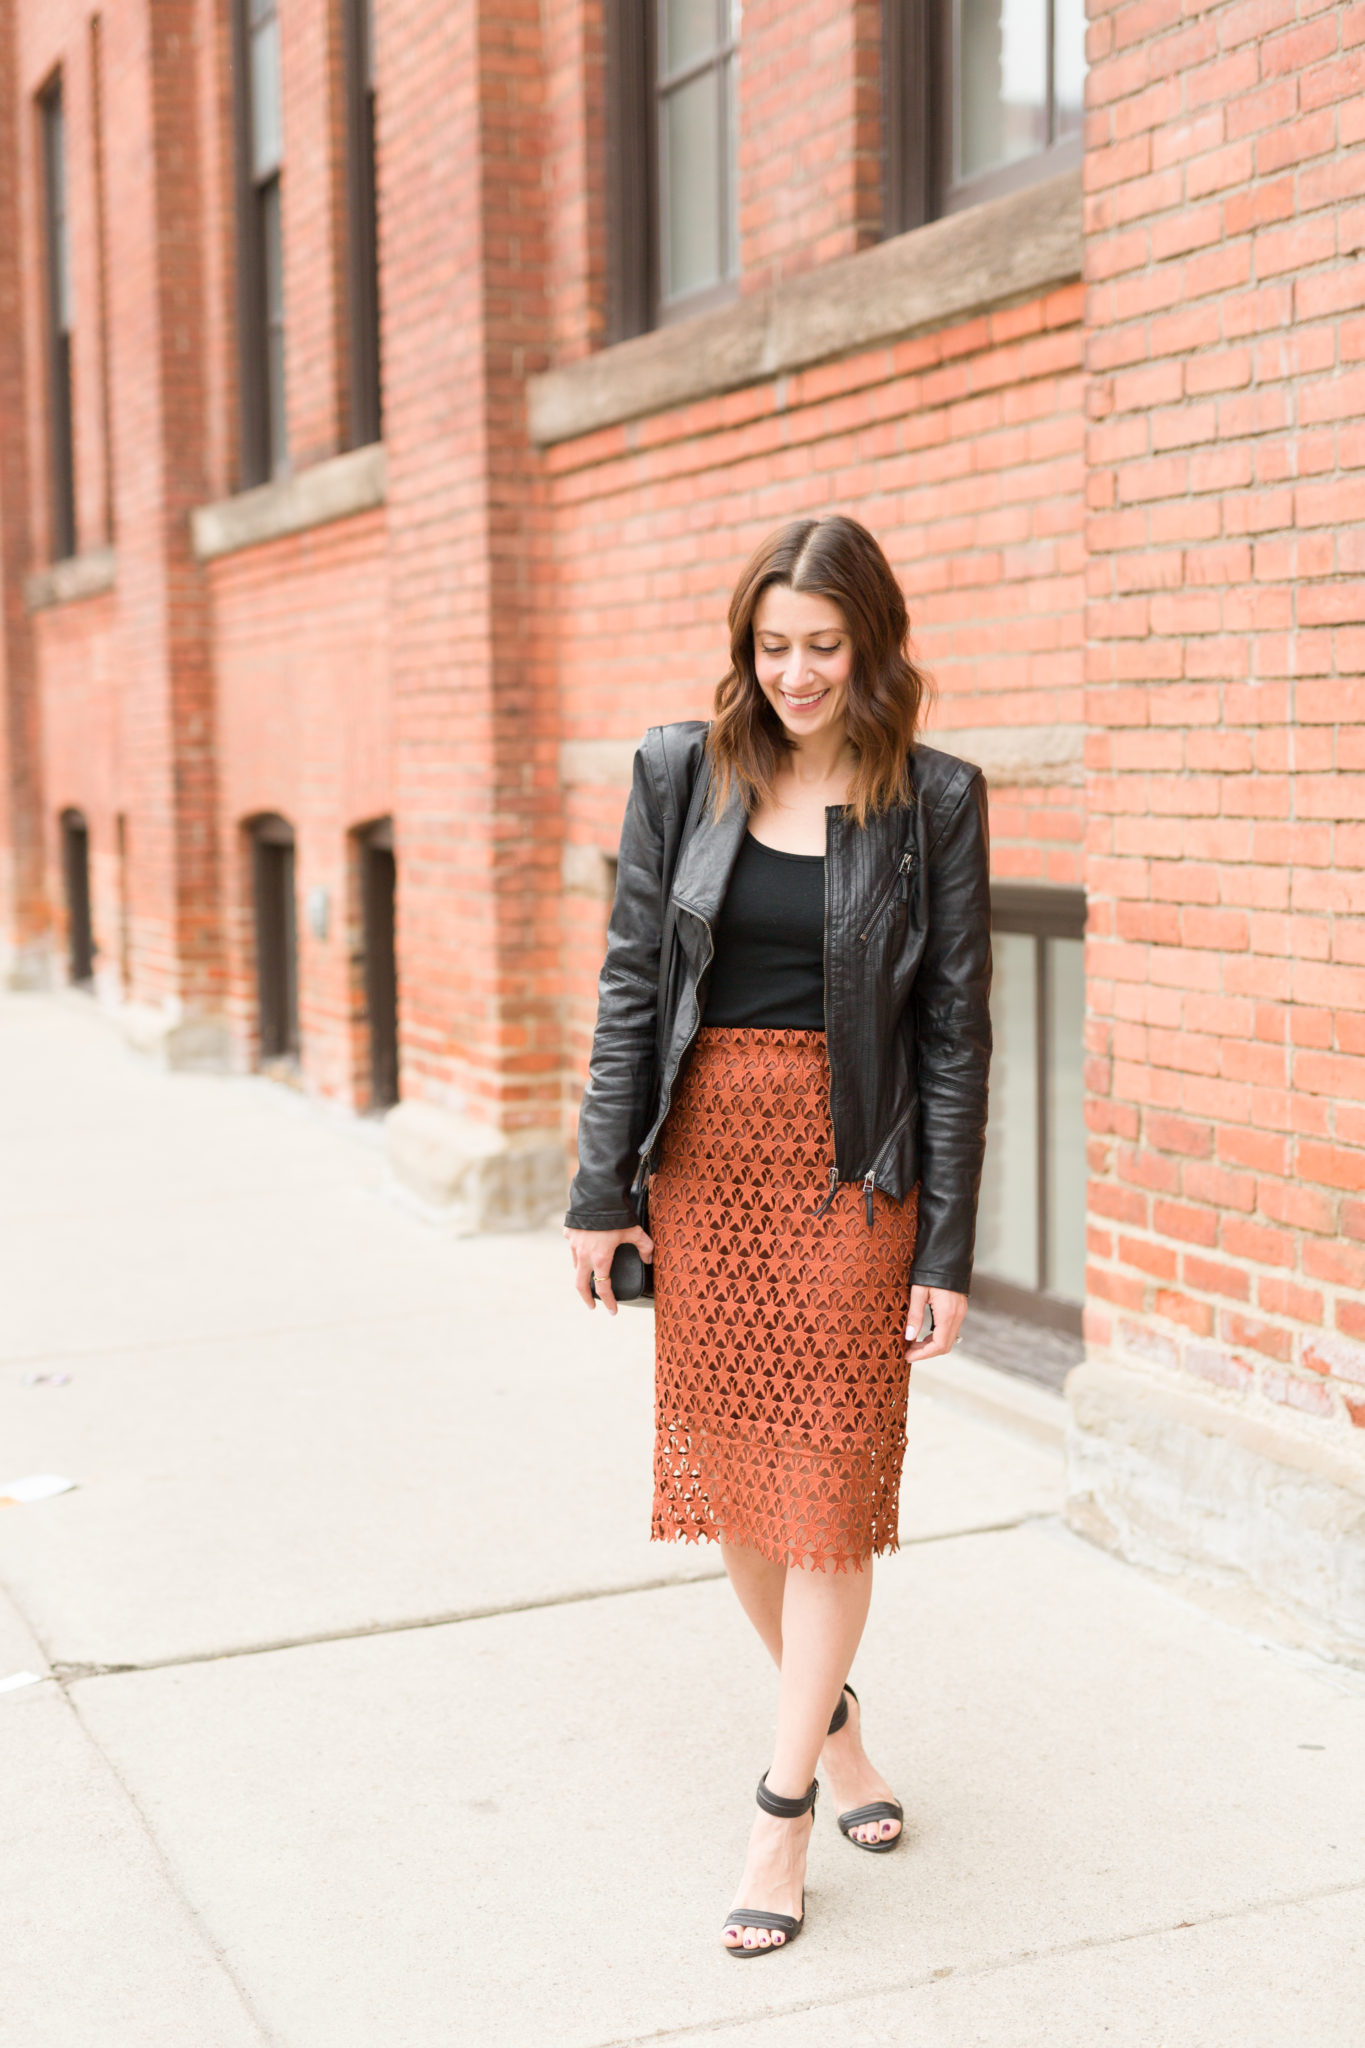 an edgy date night look | Chicwish Twinkle Star Crochet Pencil Skirt in Tan | How to style a pencil skirt for date night | chic date night looks for moms on allweareblog.com